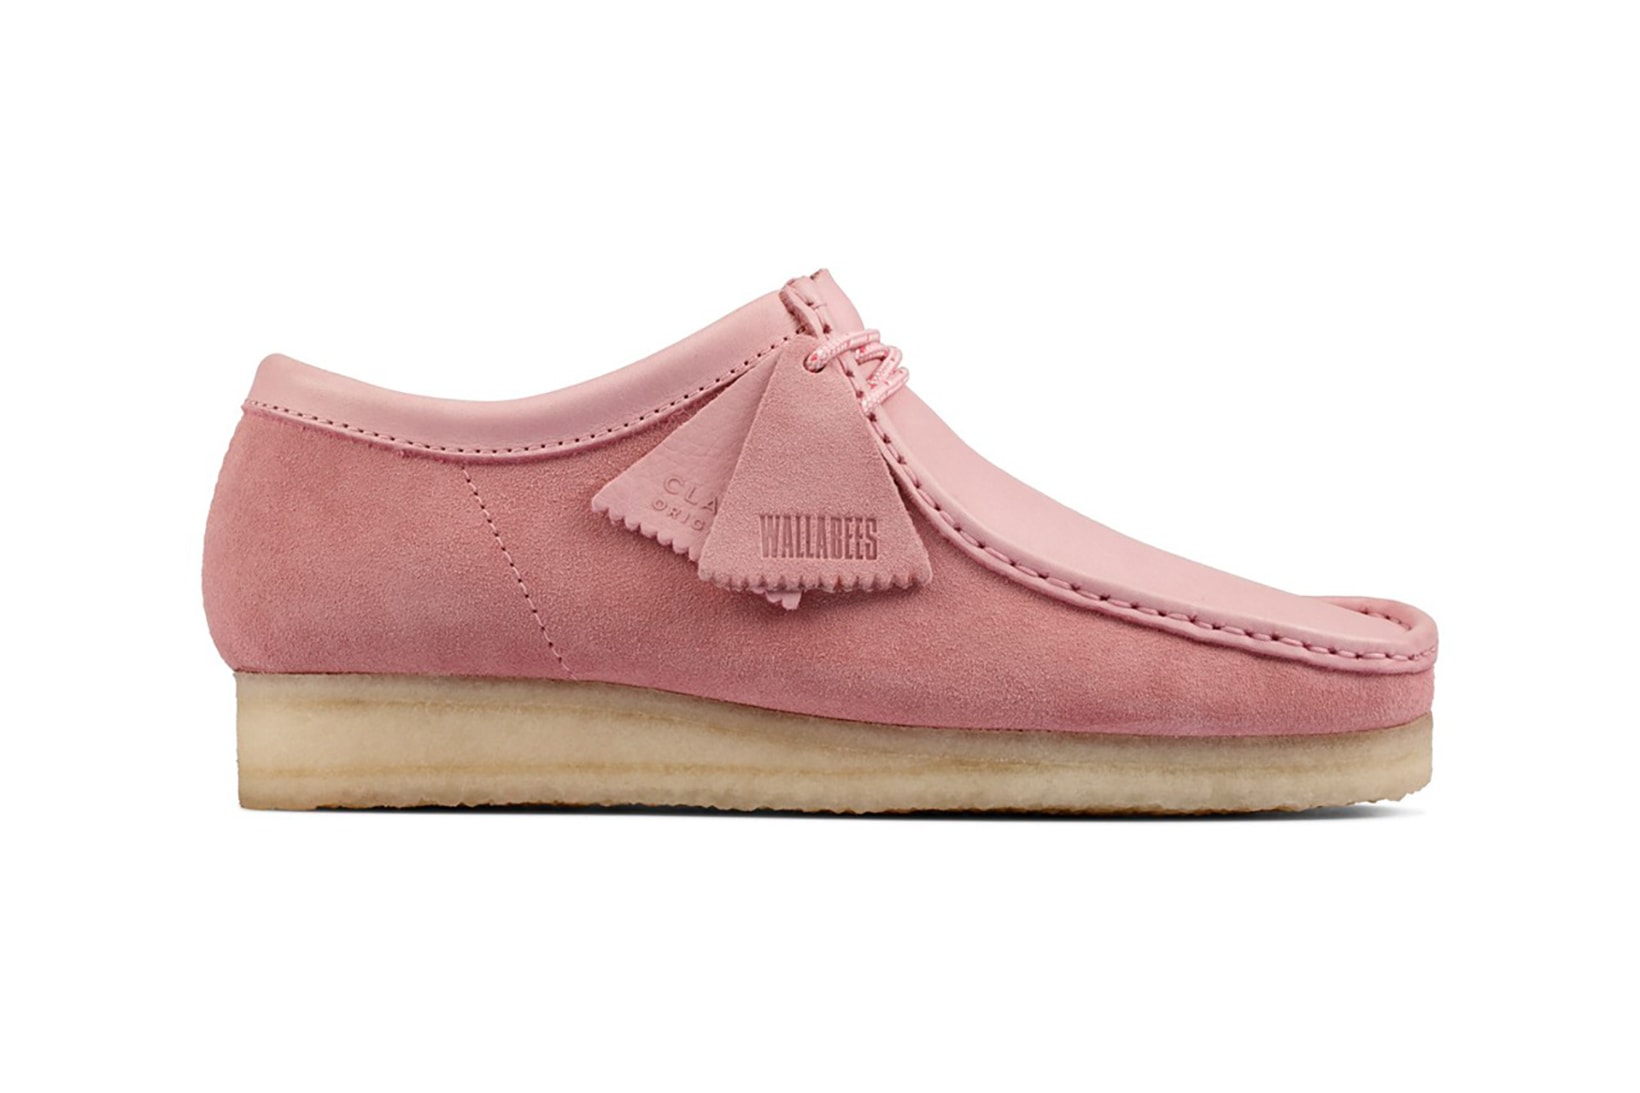 clarks originals combi wallabee pastel pink rose colorway footwear shoes lateral